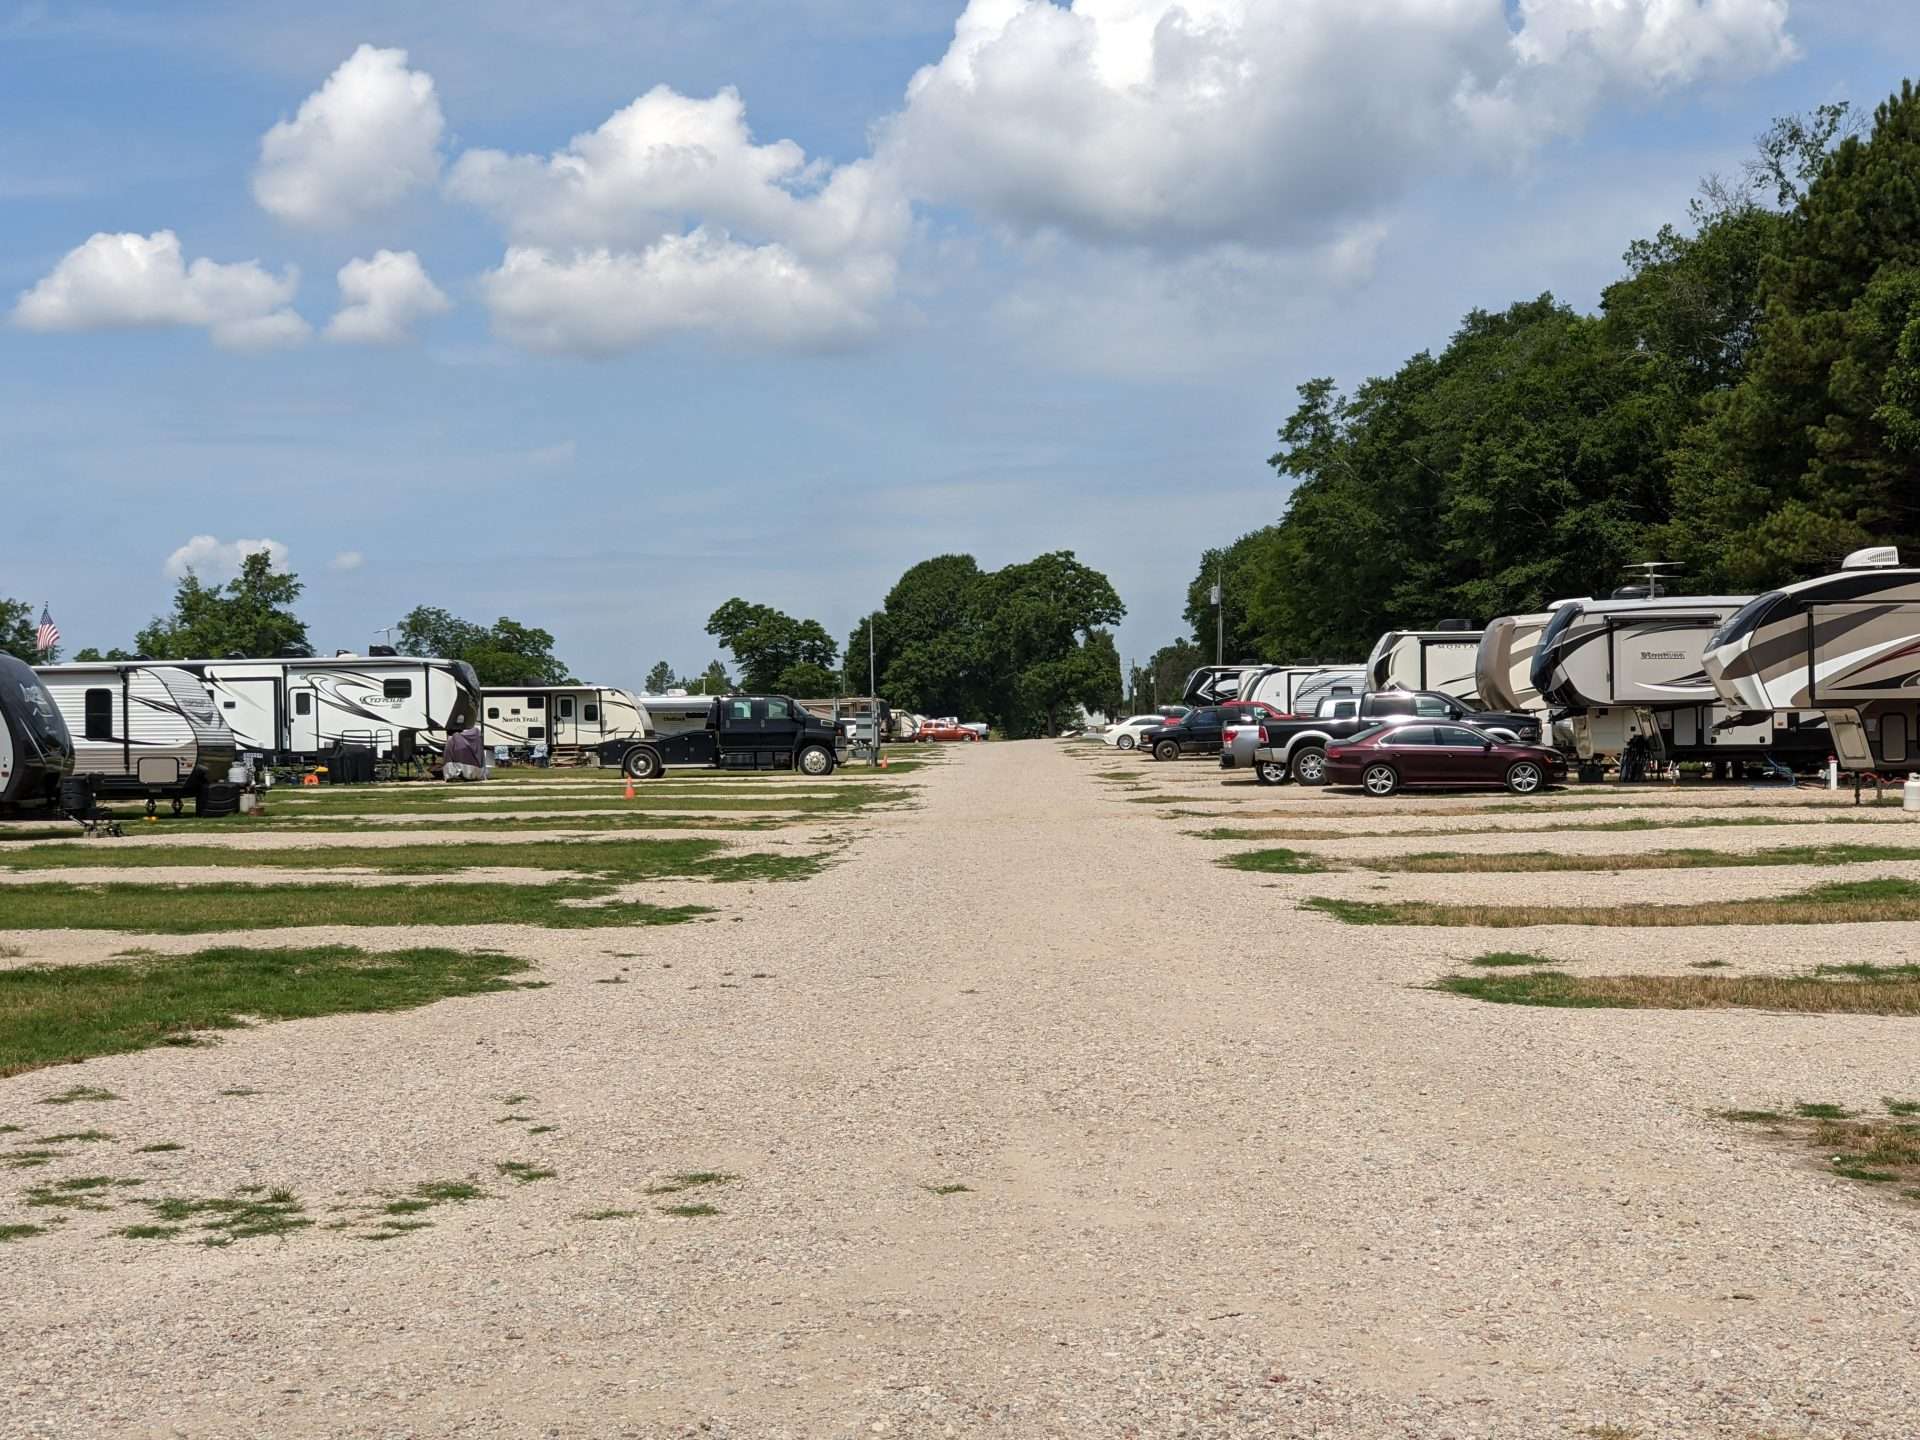 RVs parked at campsite